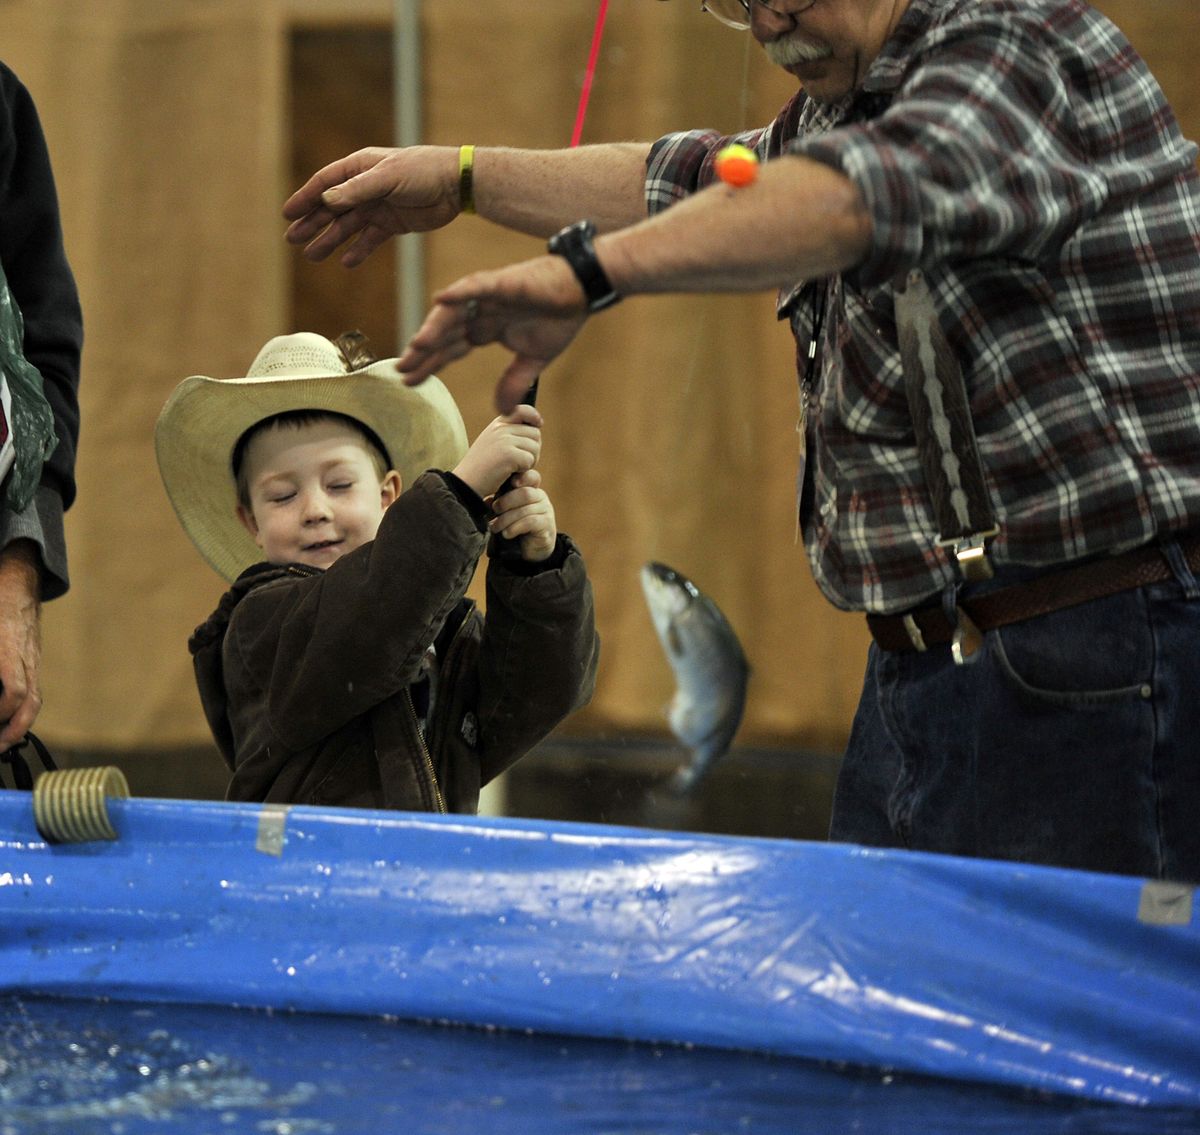 Travis Hendren, 5, of Athol, Idaho, hauls in a rainbow trout at the 2012 Big Horn Outdoor Adventure Show. (Dan Pelle)